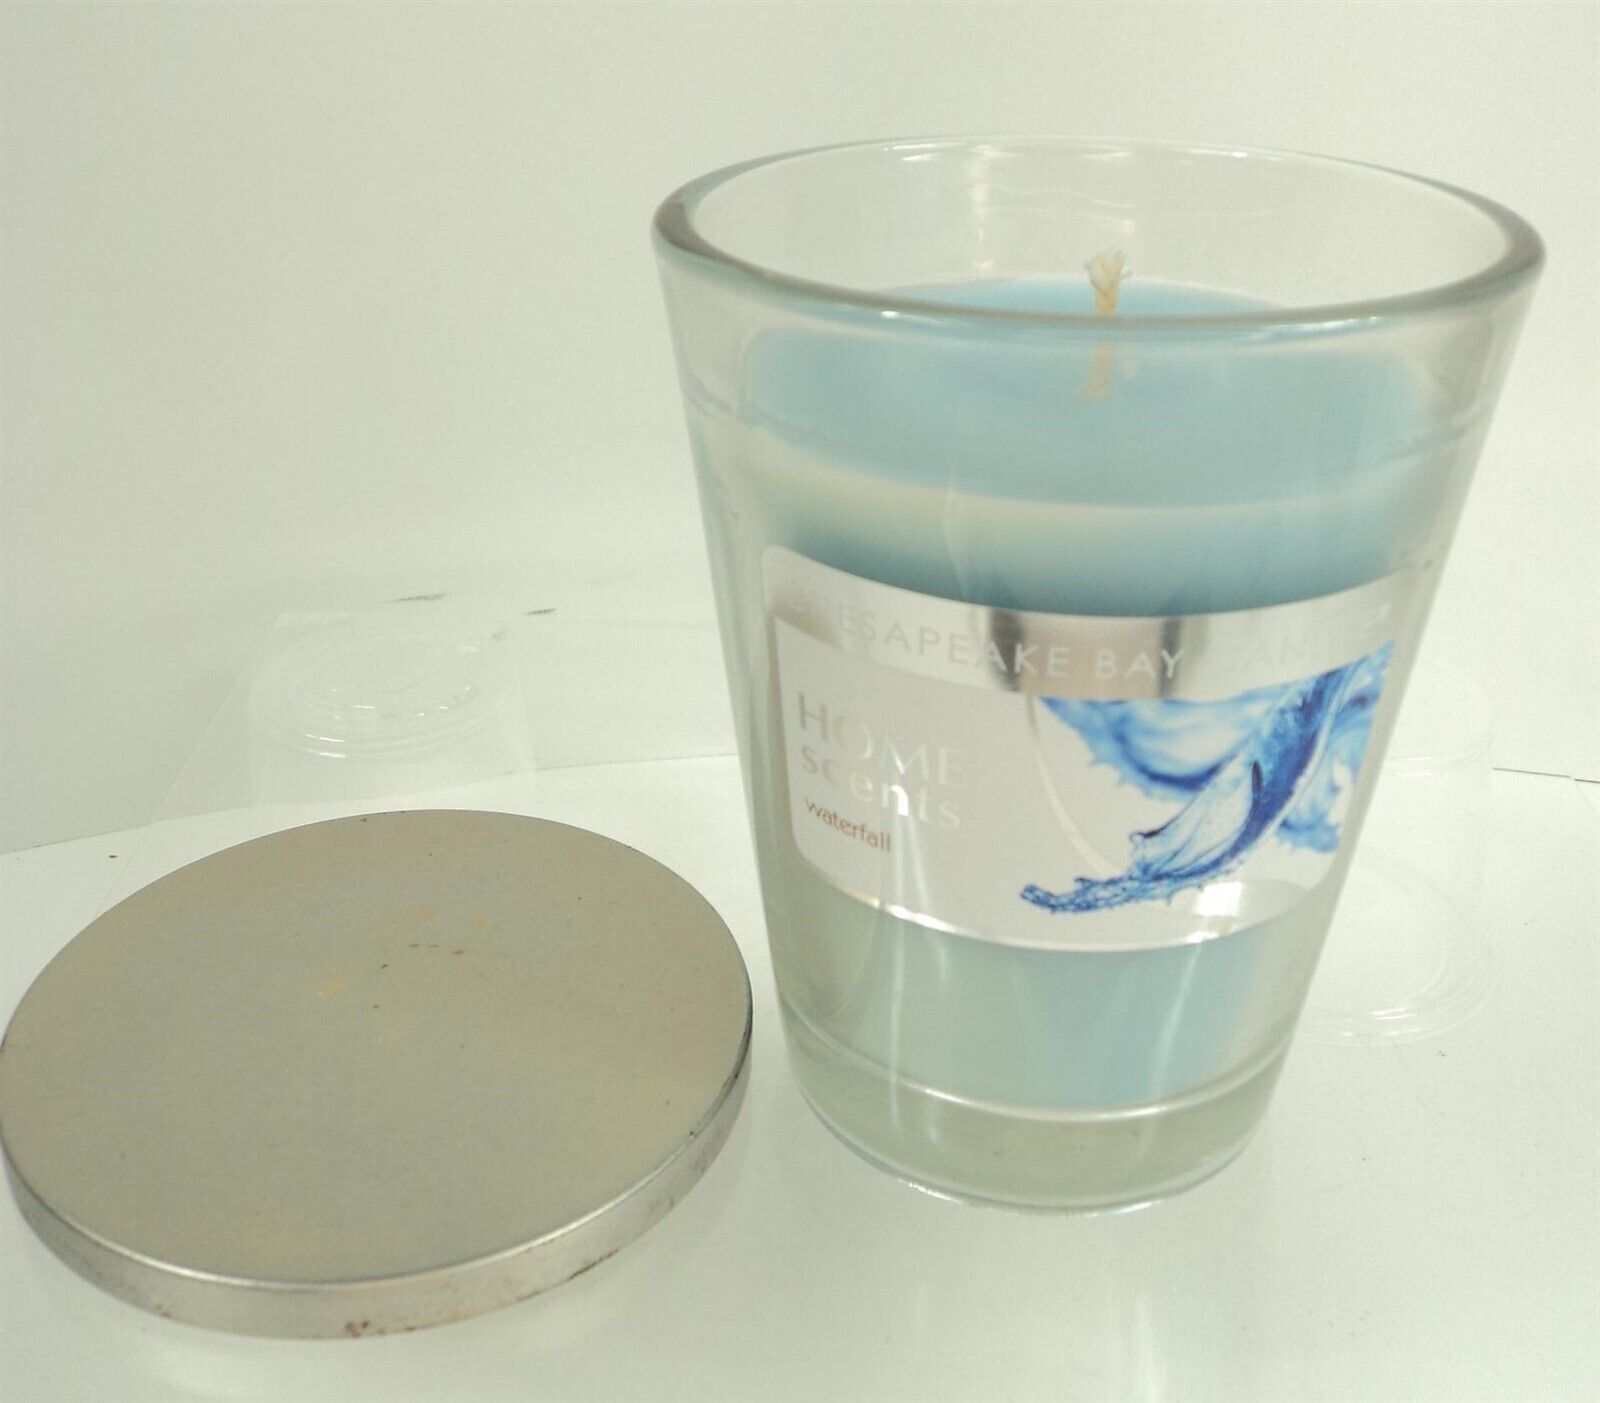 Primary image for Chesapeake Bay Candle Home Scents 11.5 oz Scented Candle - Waterfall - New